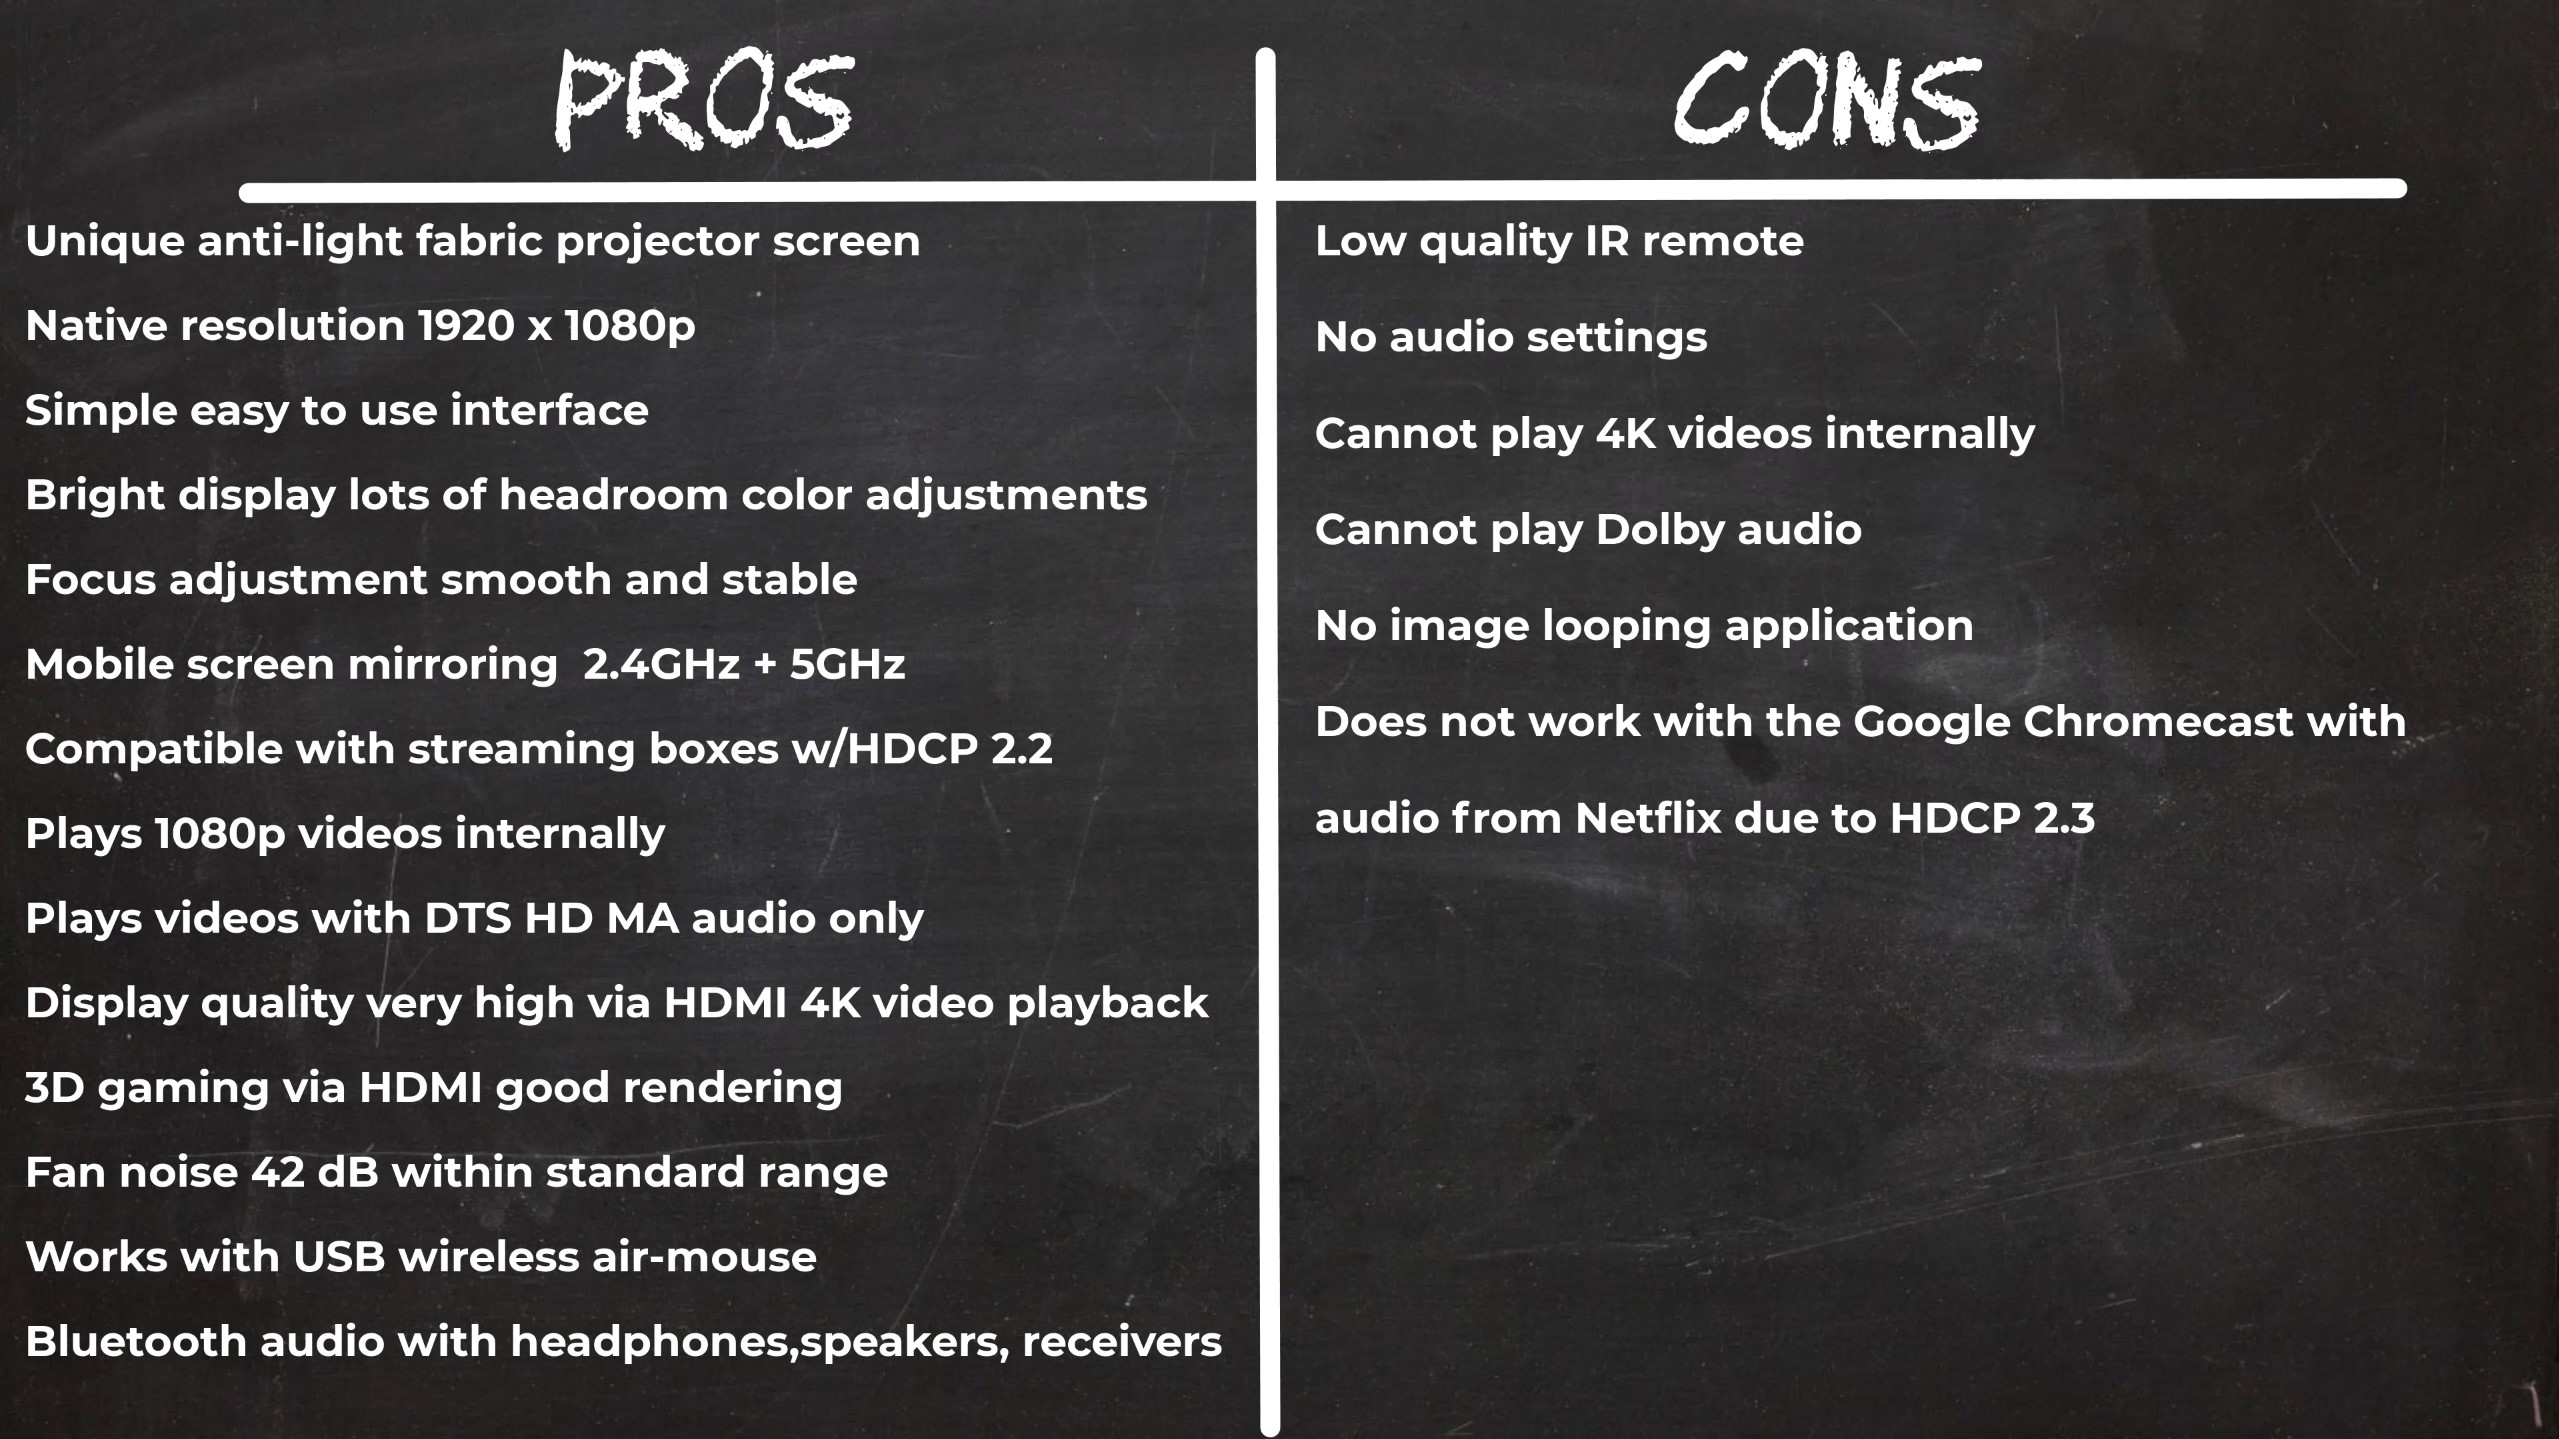 Yaber Pro U9 projector pros and cons